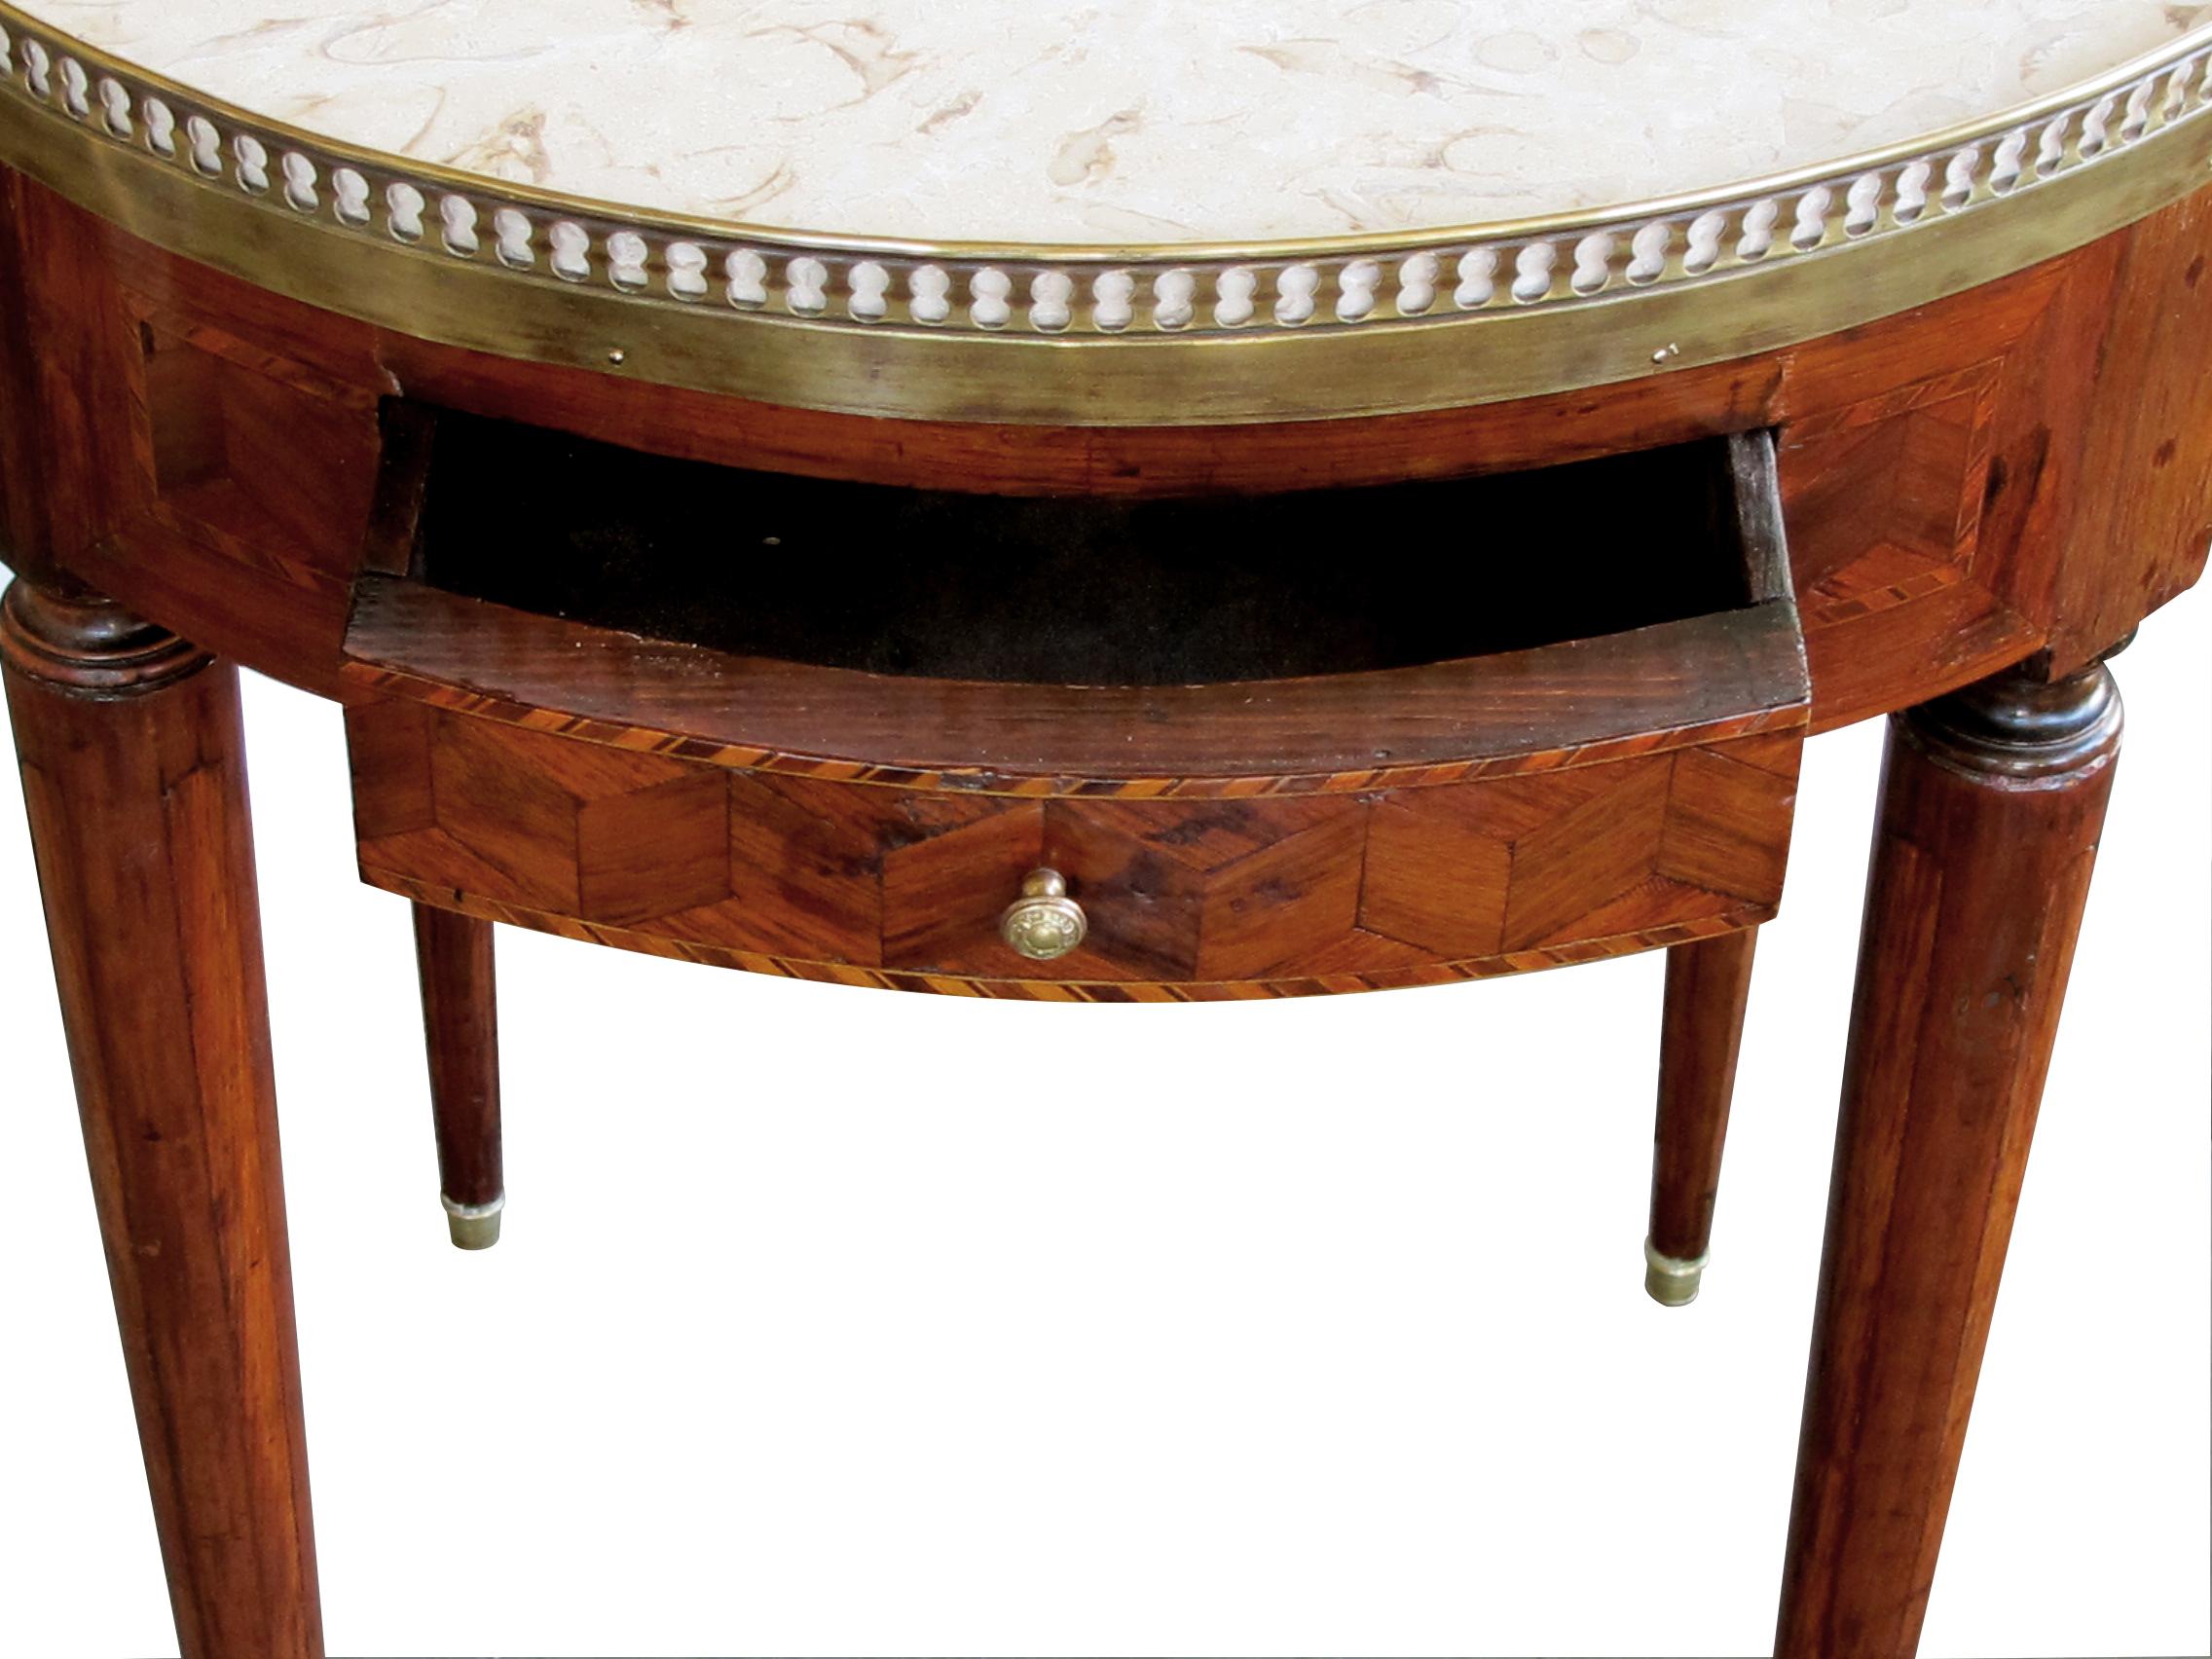 Parquetry Elegant French Directoire Circular Bouillotte Table with Fossilized Marble Top